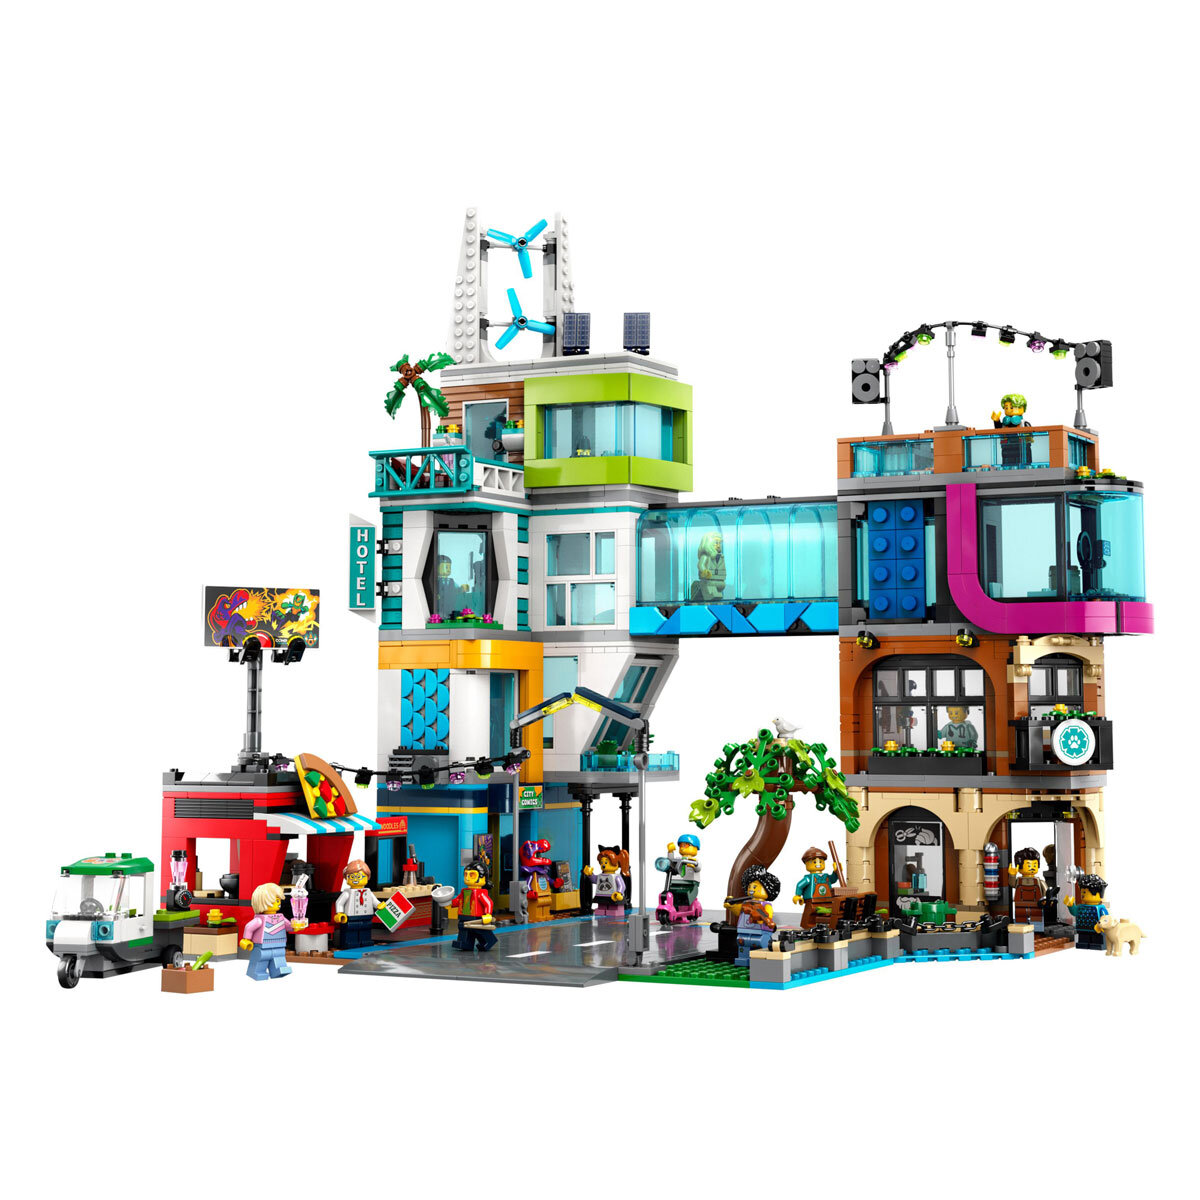 Buy LEGO CIty Centre Overview Image at Costco.co.uk